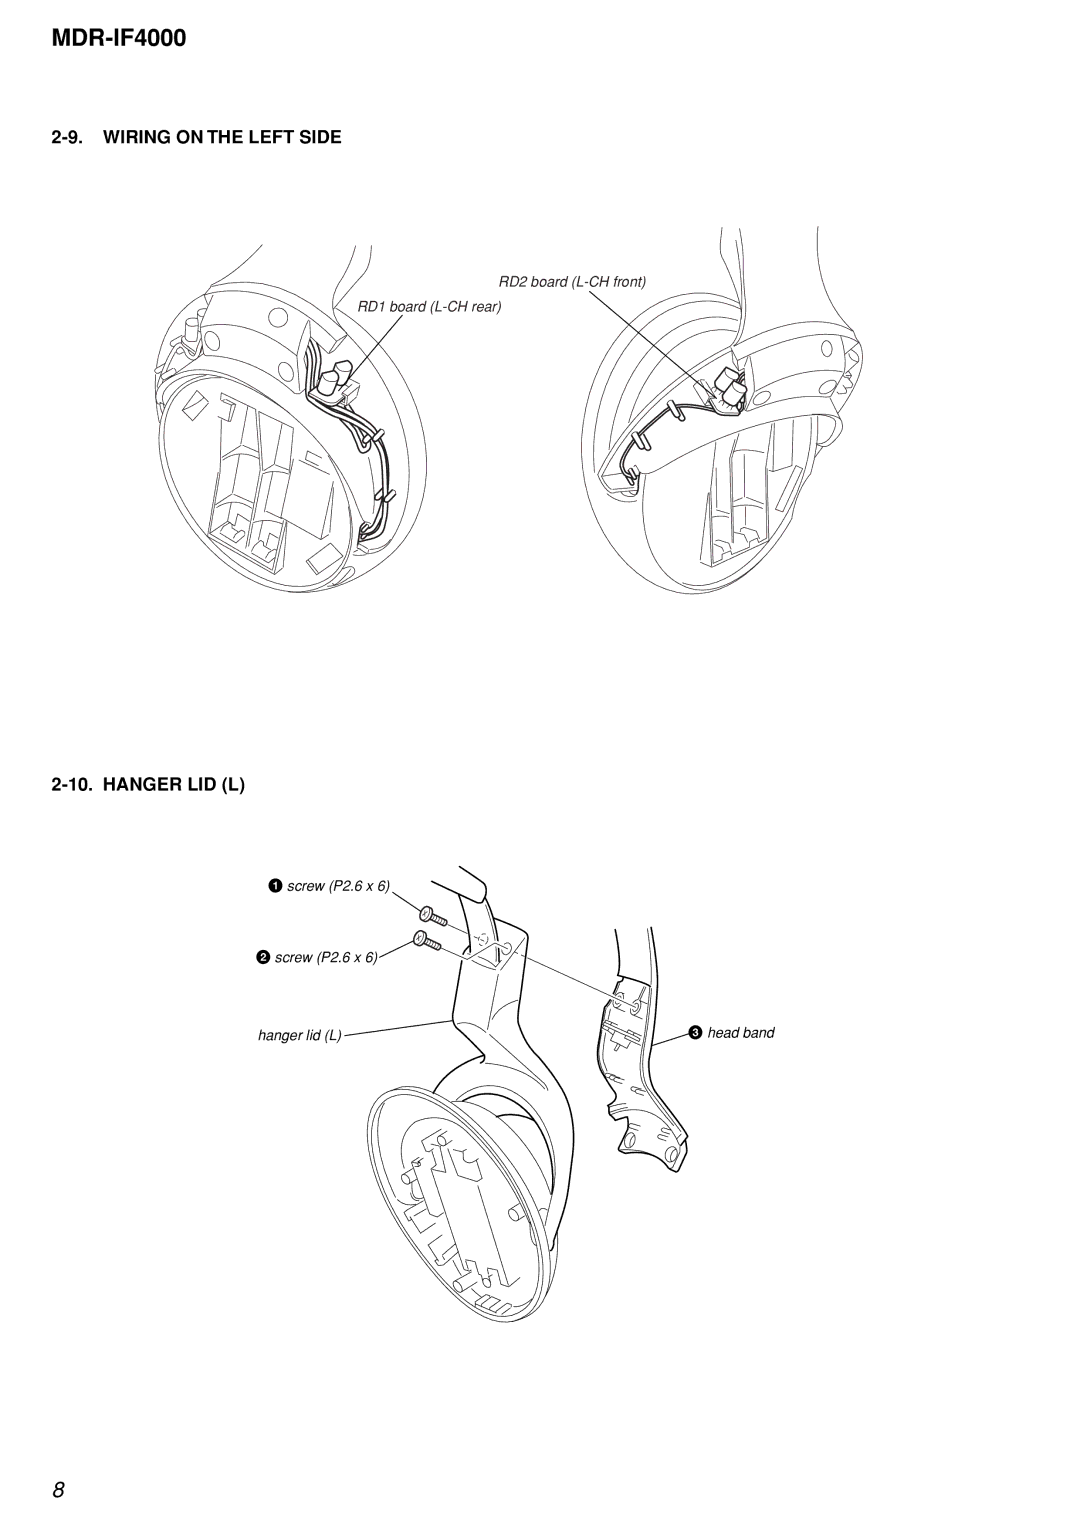 Sony MDR-IF4000 service manual Wiring on the Left Side 